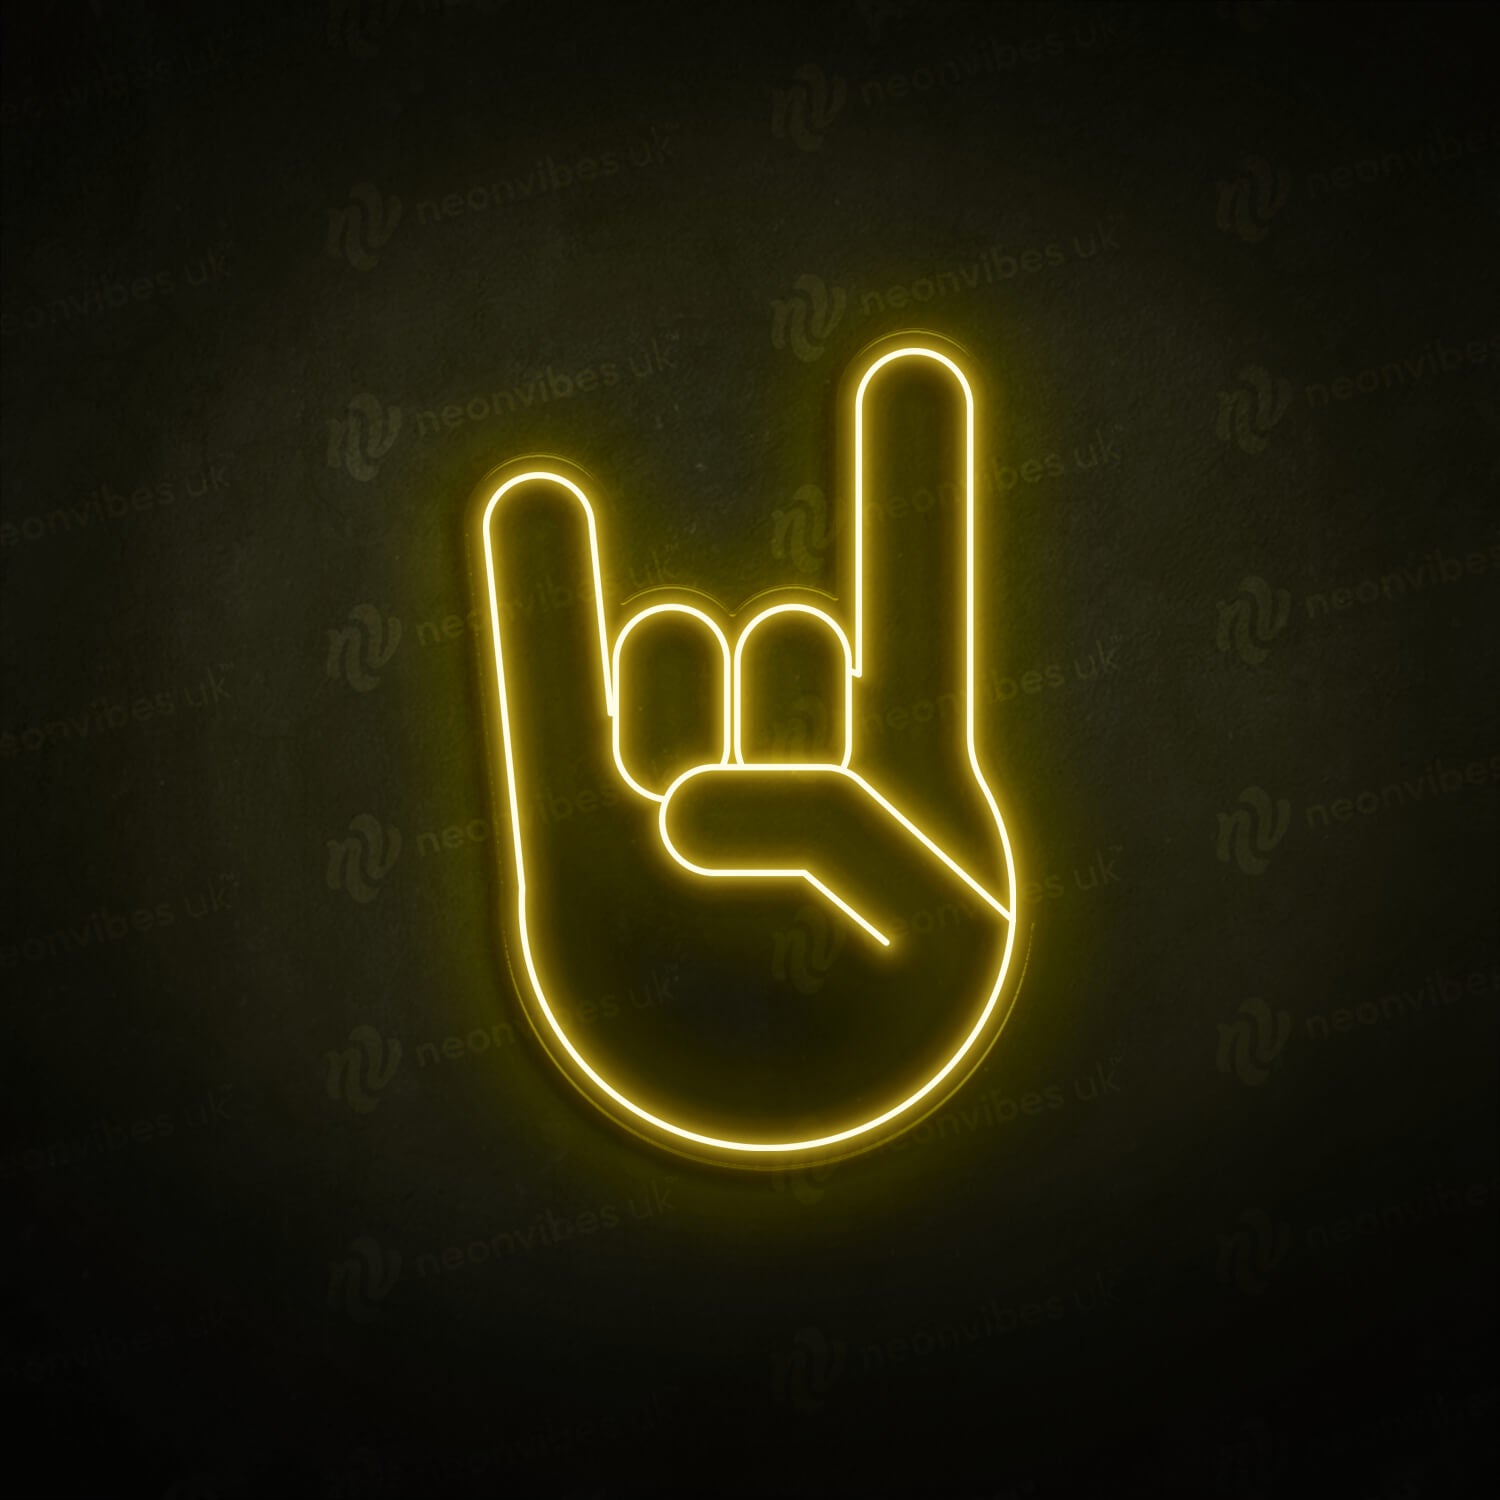 Rock On neon sign